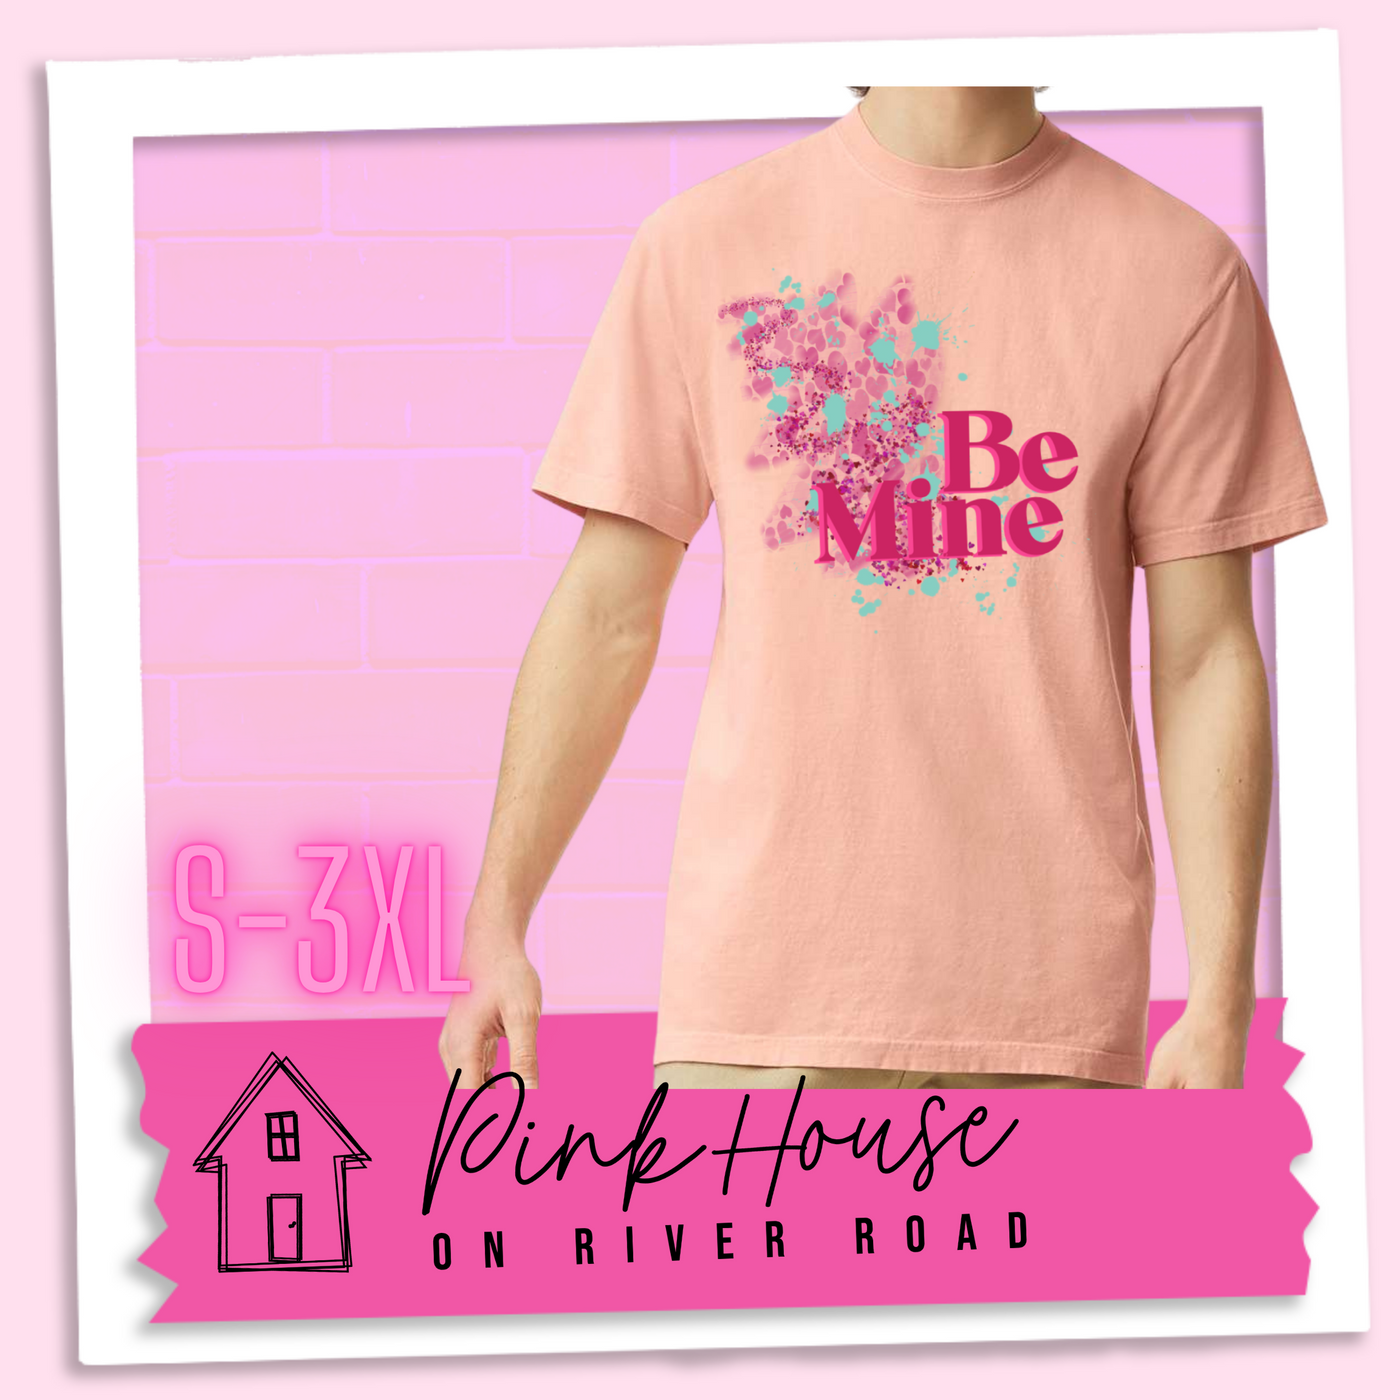 Peachy  Tee with a squiggle design made of pink hearts and pink sparkles with light teal splatters and pink text at the end of the art that says Be Mine with a hot pink shadow.